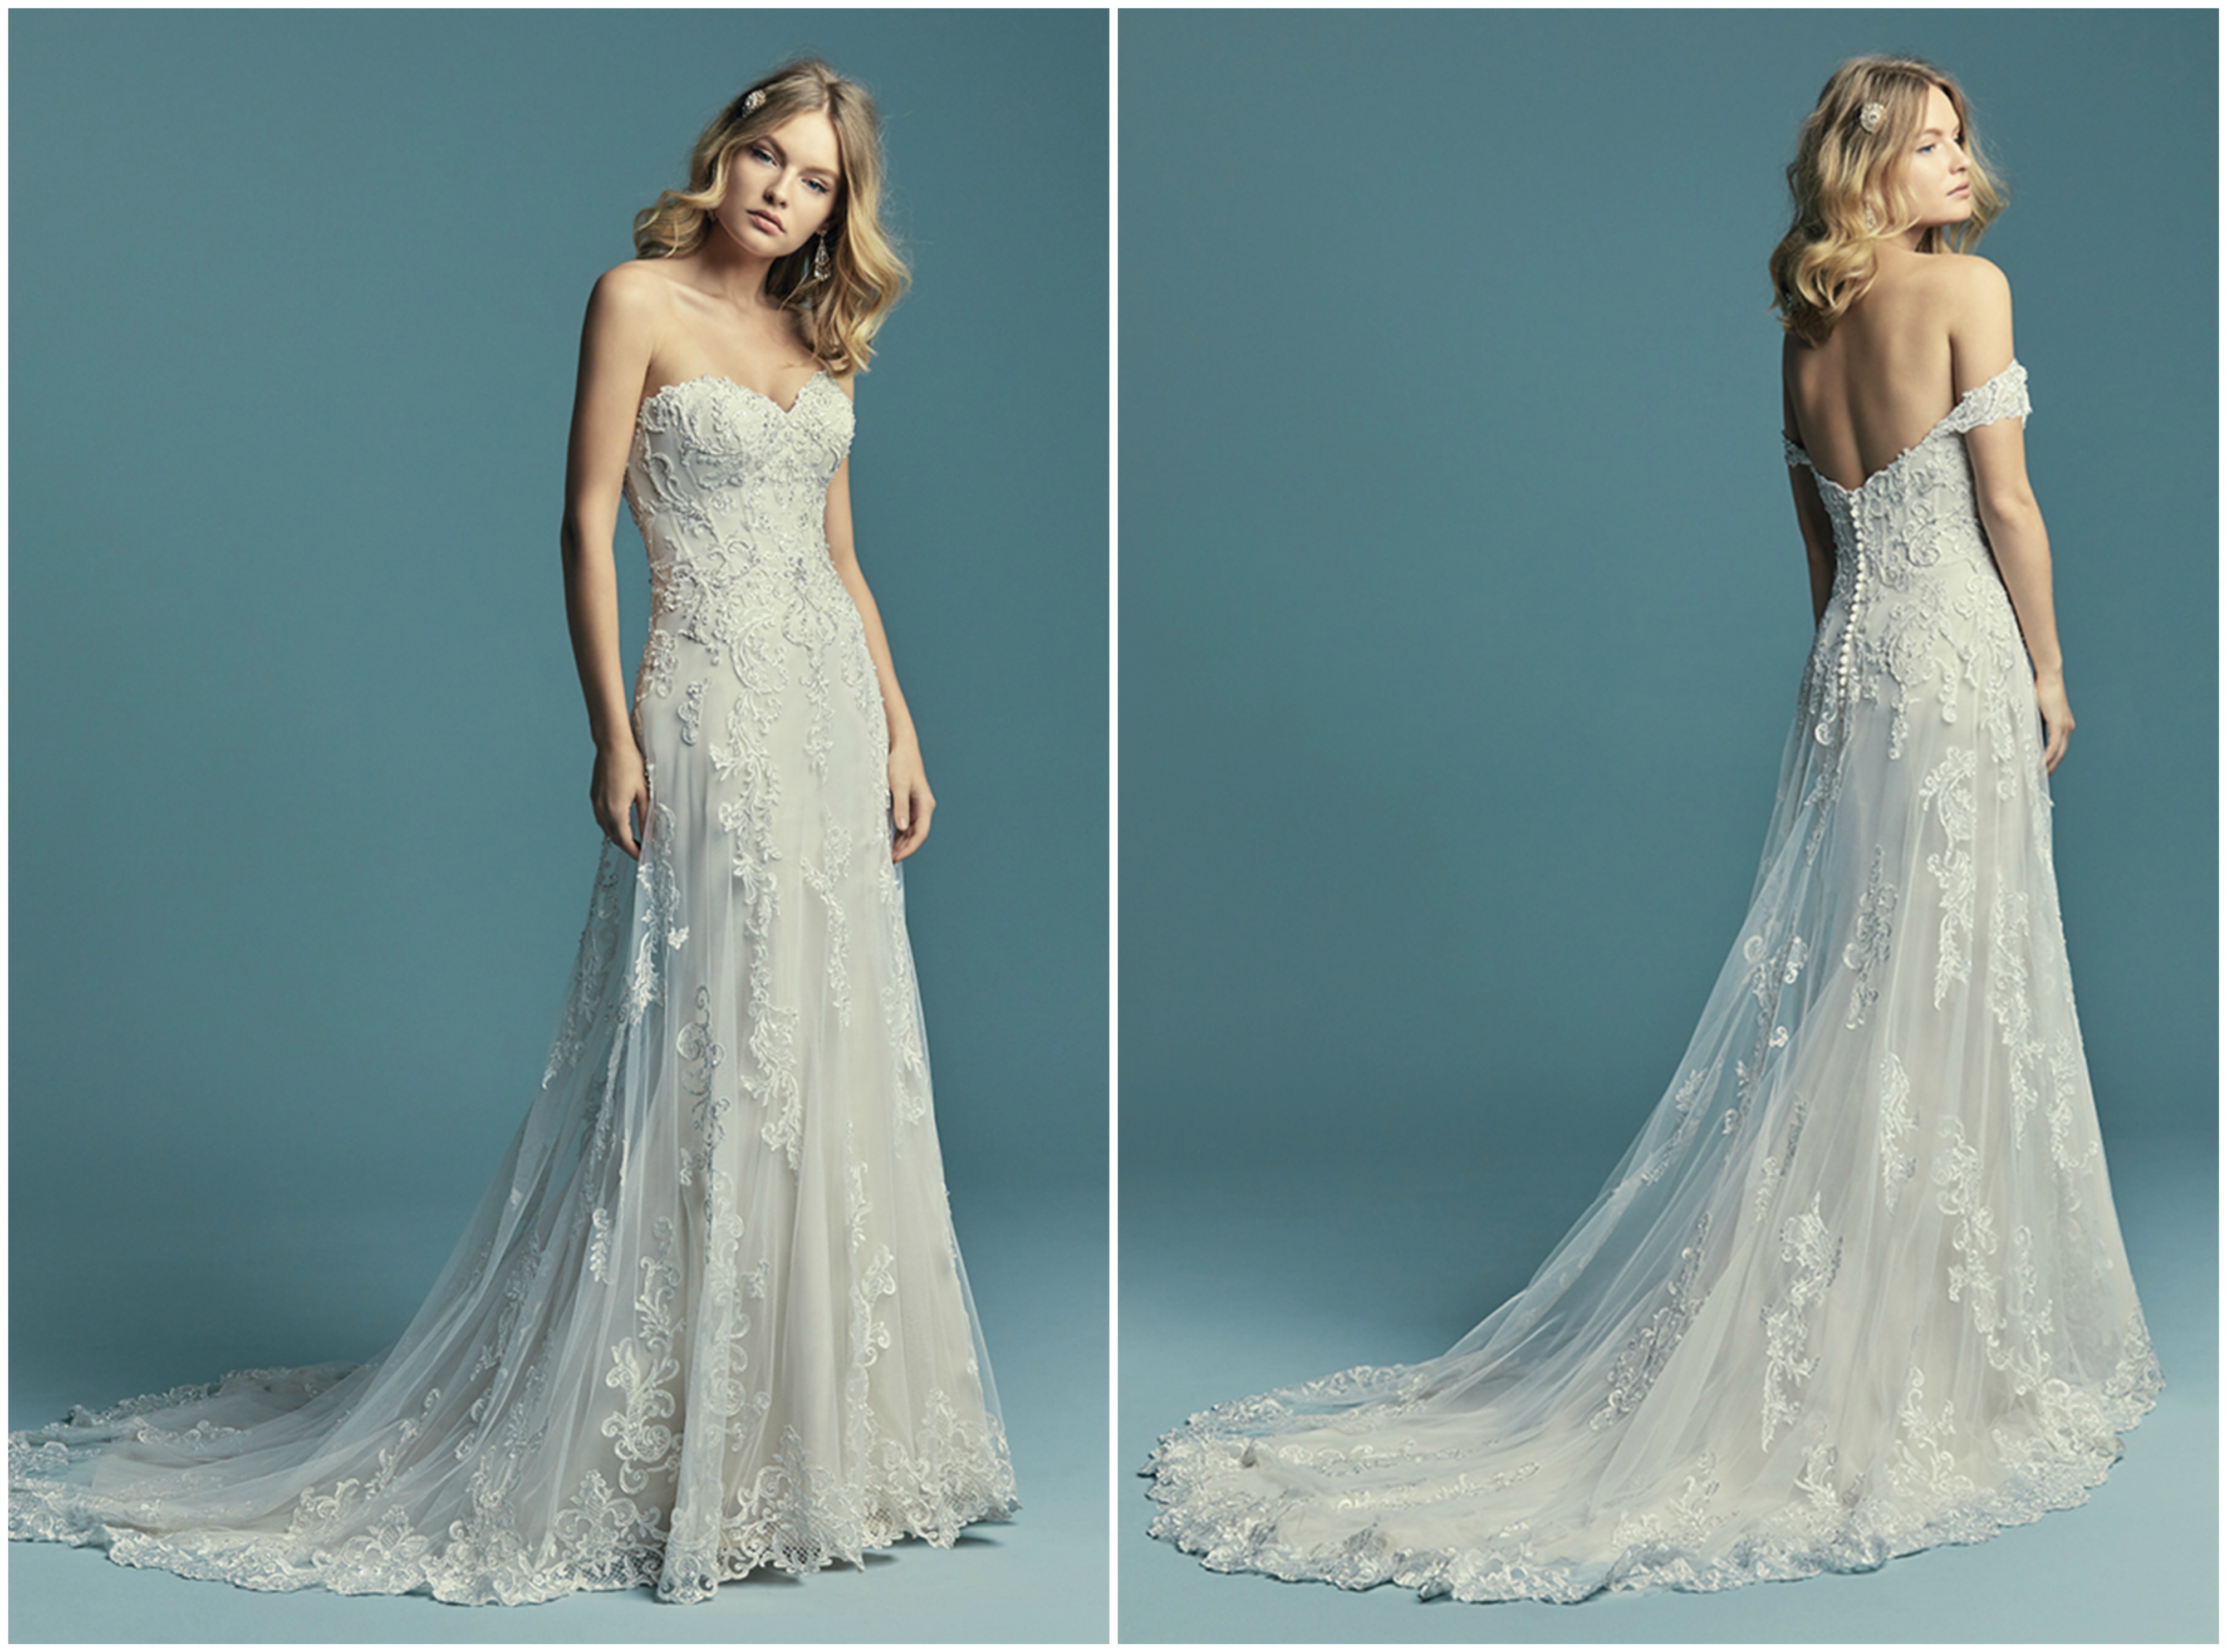 <a href="https://www.maggiesottero.com/maggie-sottero/indiana/11485" target="_blank">Maggie Sottero</a>